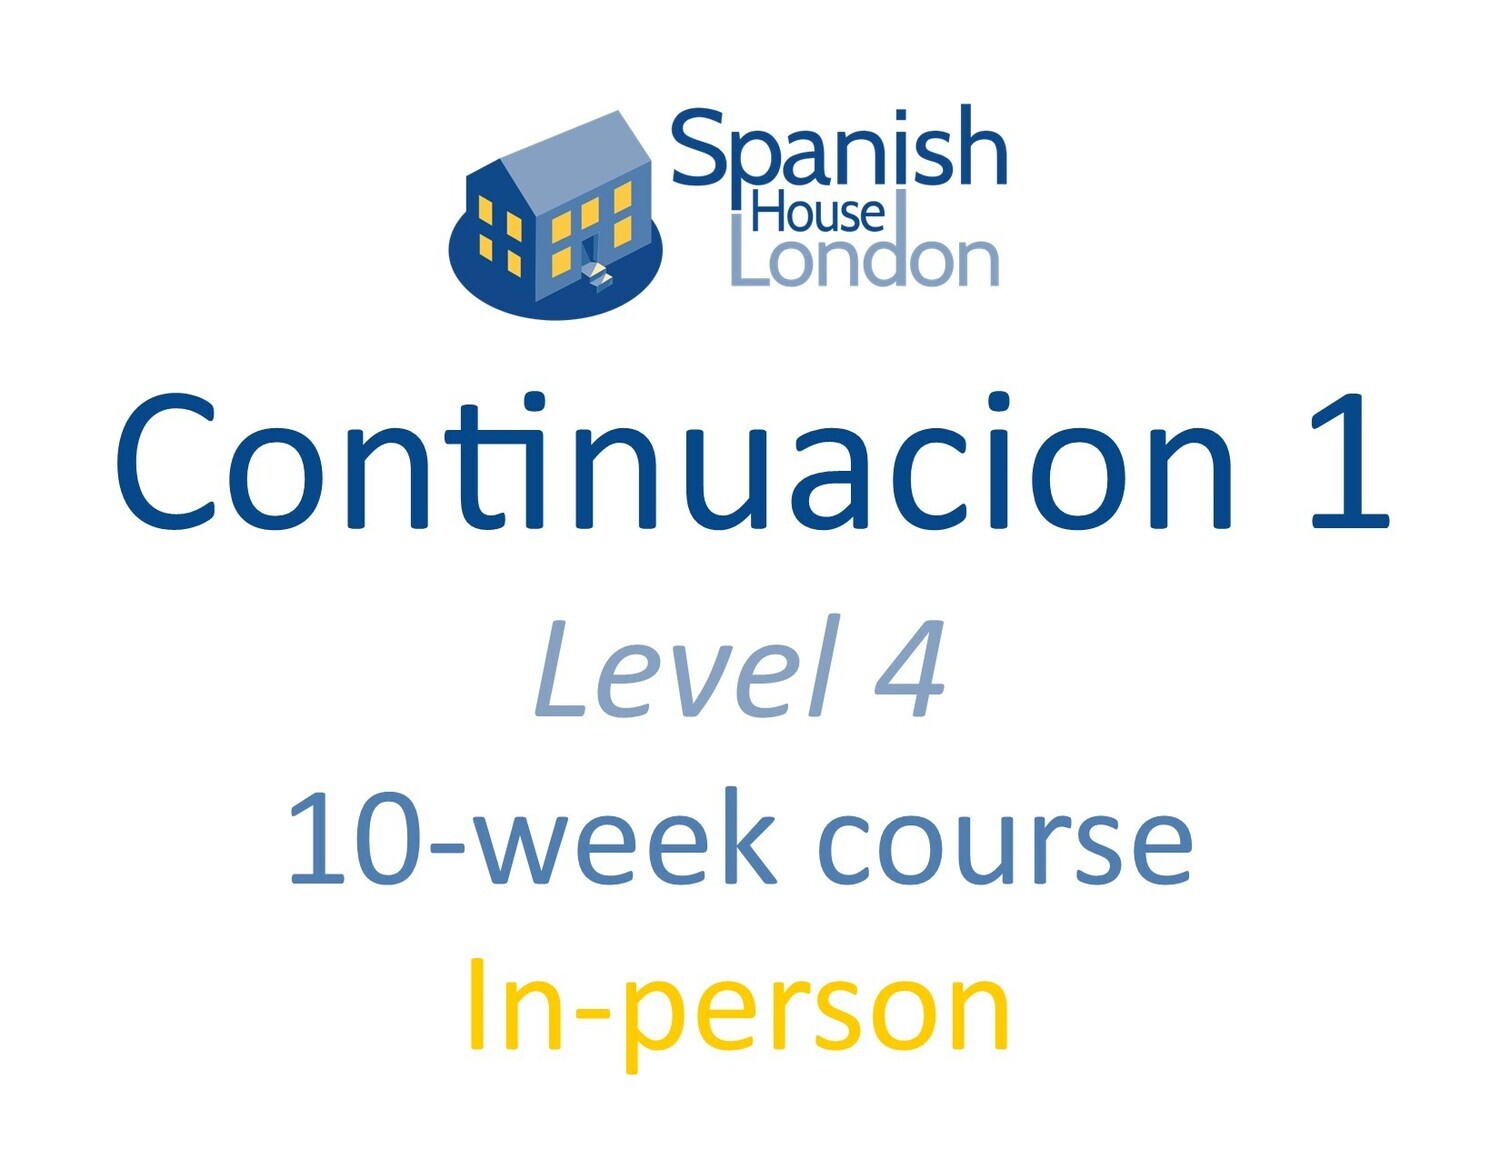 Continuacion 1 Course starting on 20th September at 7.30pm in Euston / King's Cross